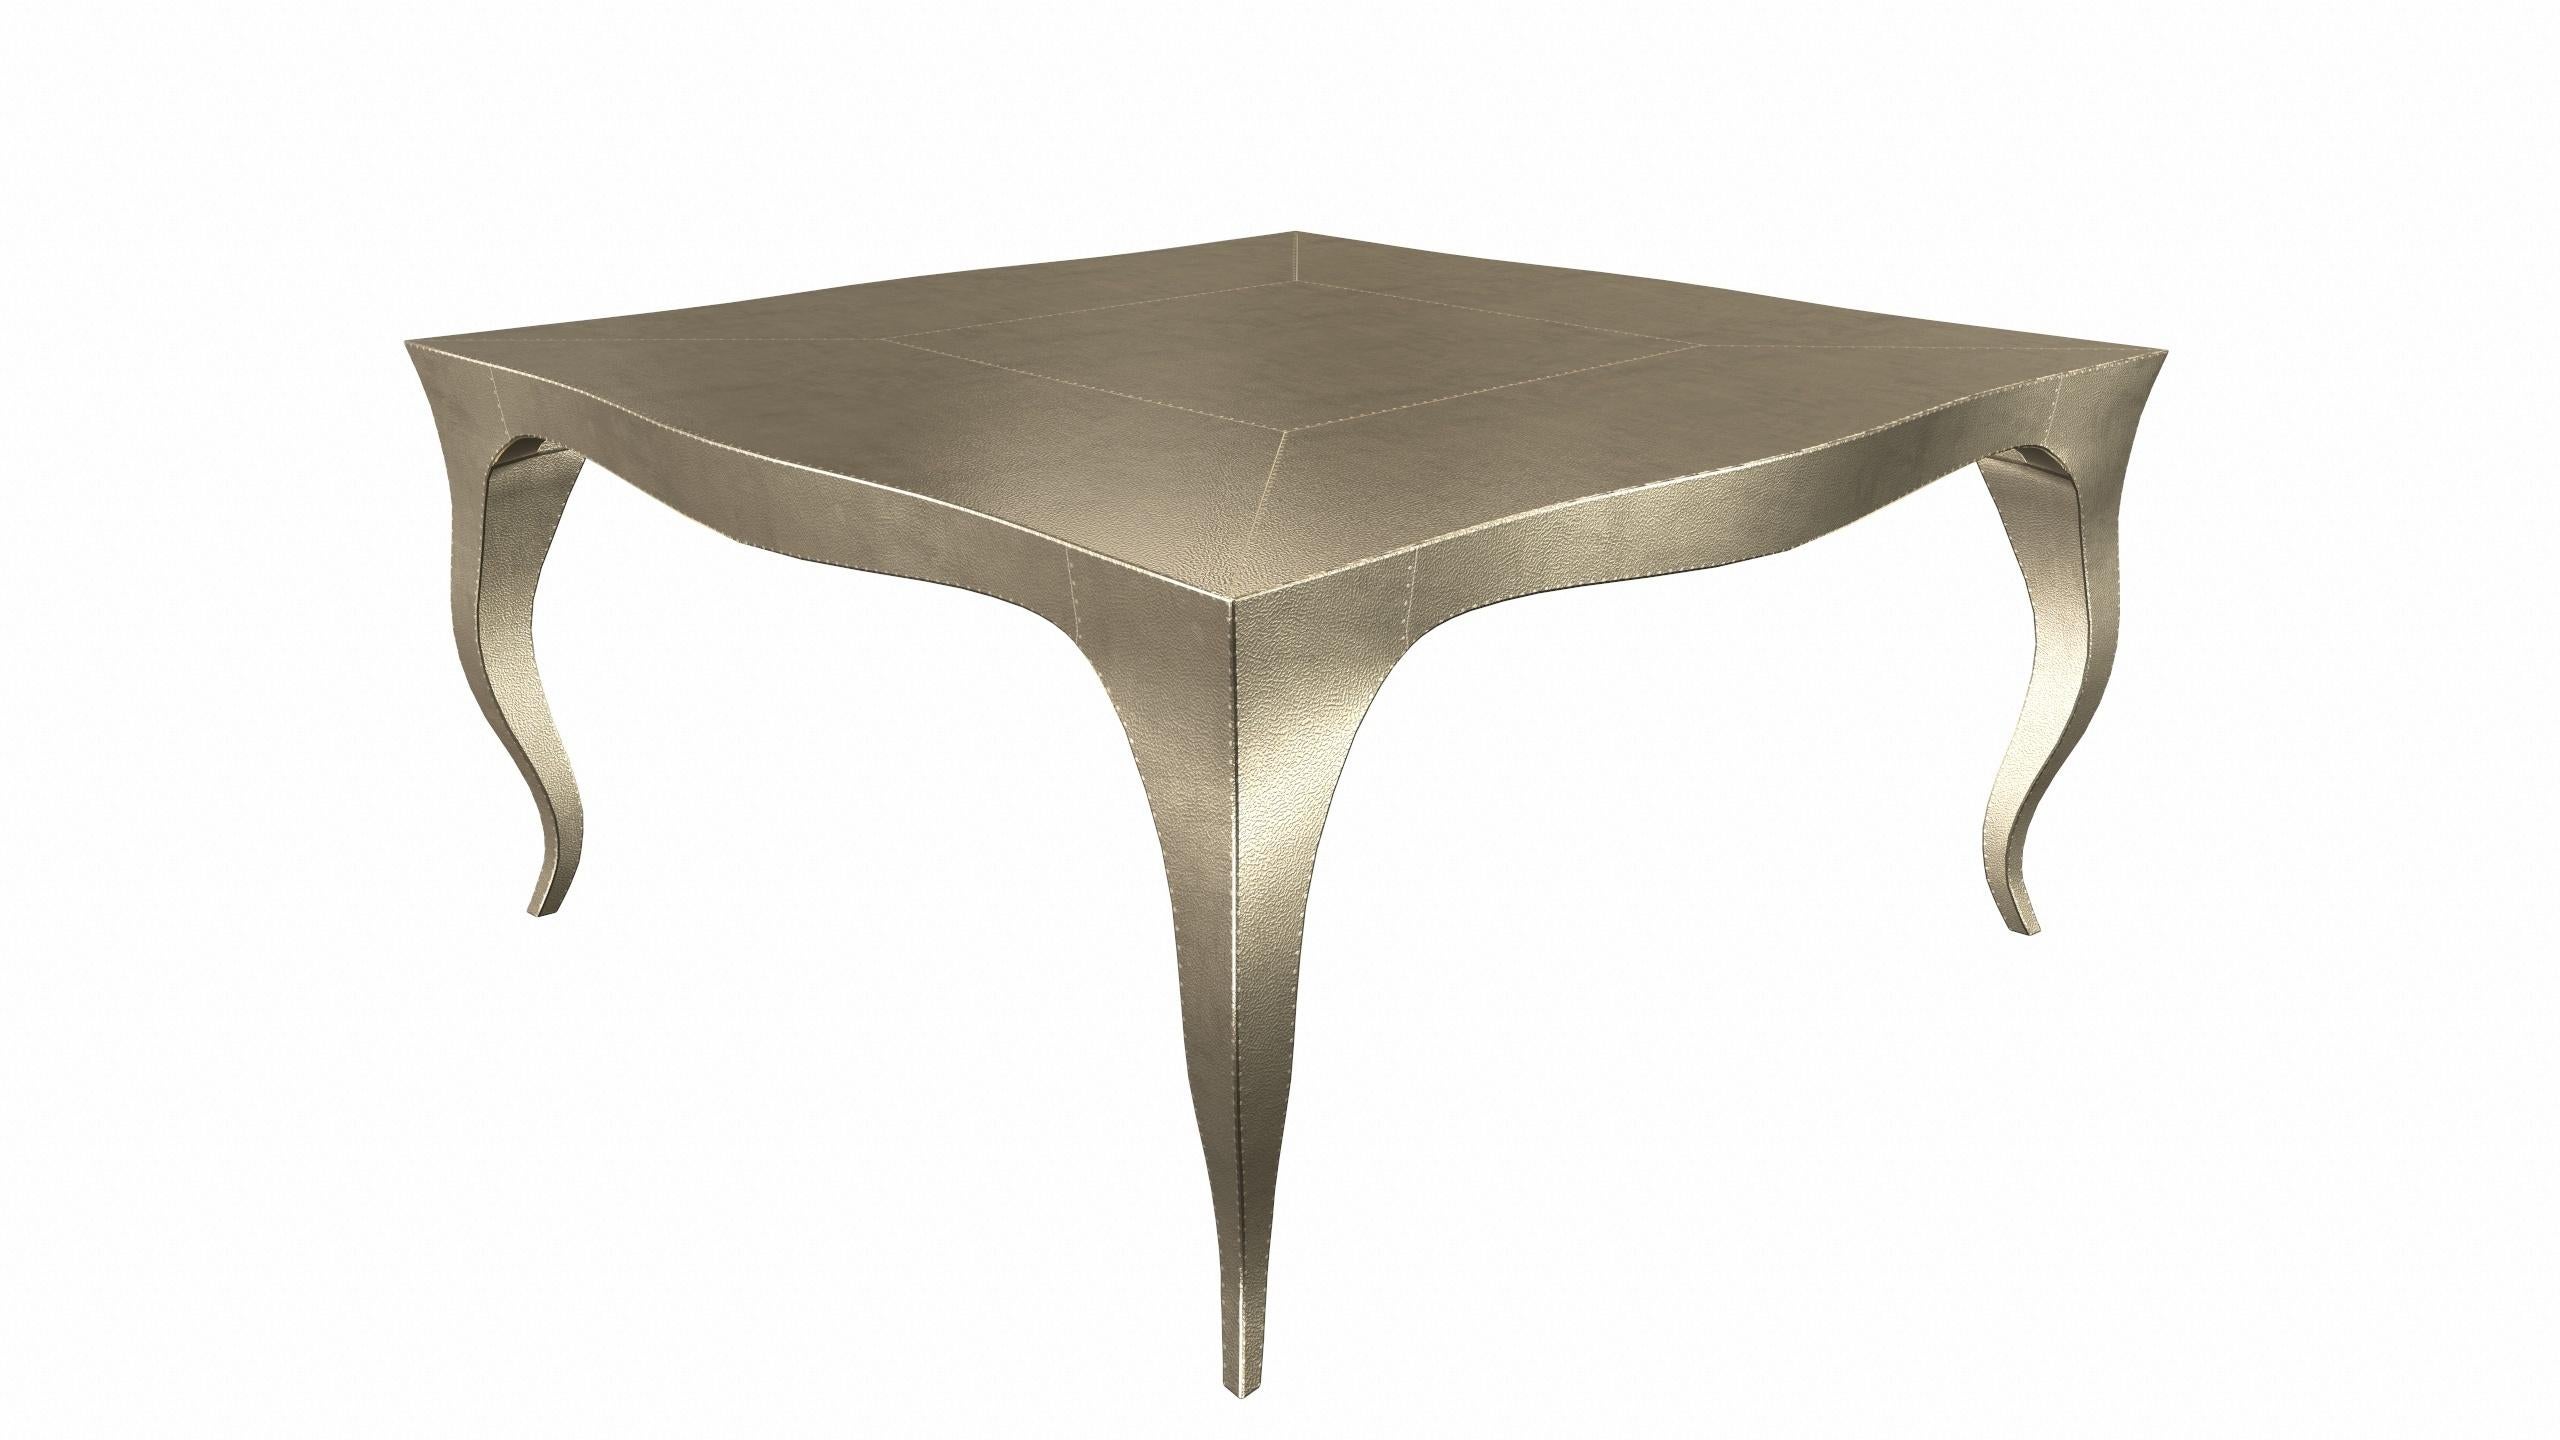 Other Louise Art Deco Center Tables Fine Hammered Brass by Paul Mathieu For Sale